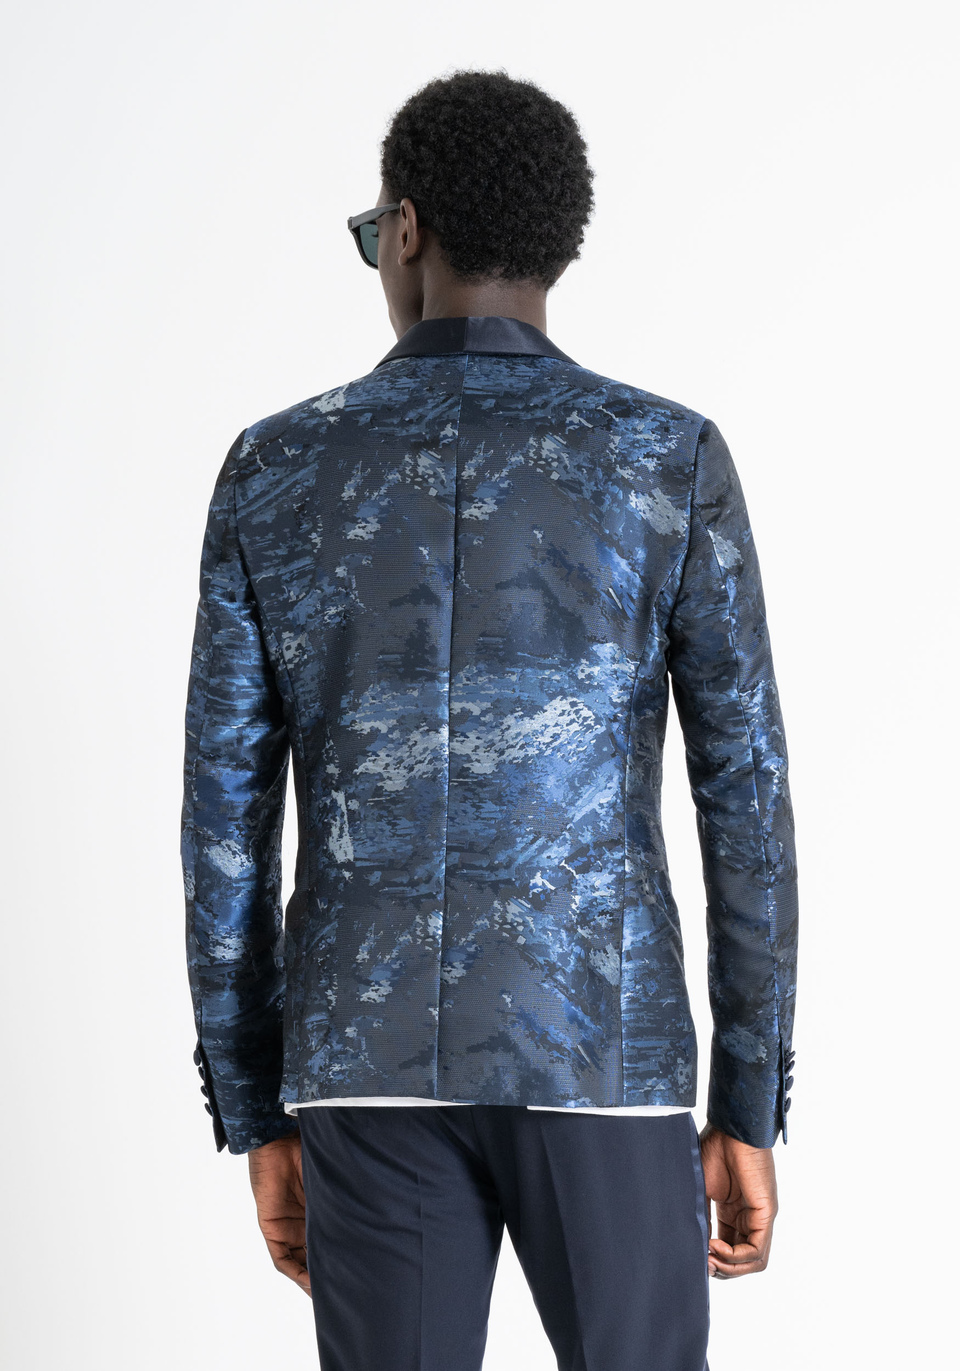 SLIM FIT "ROXANNE" JACKET IN JACQUARD FABRIC WITH SATIN CONTRAST - Antony Morato Online Shop